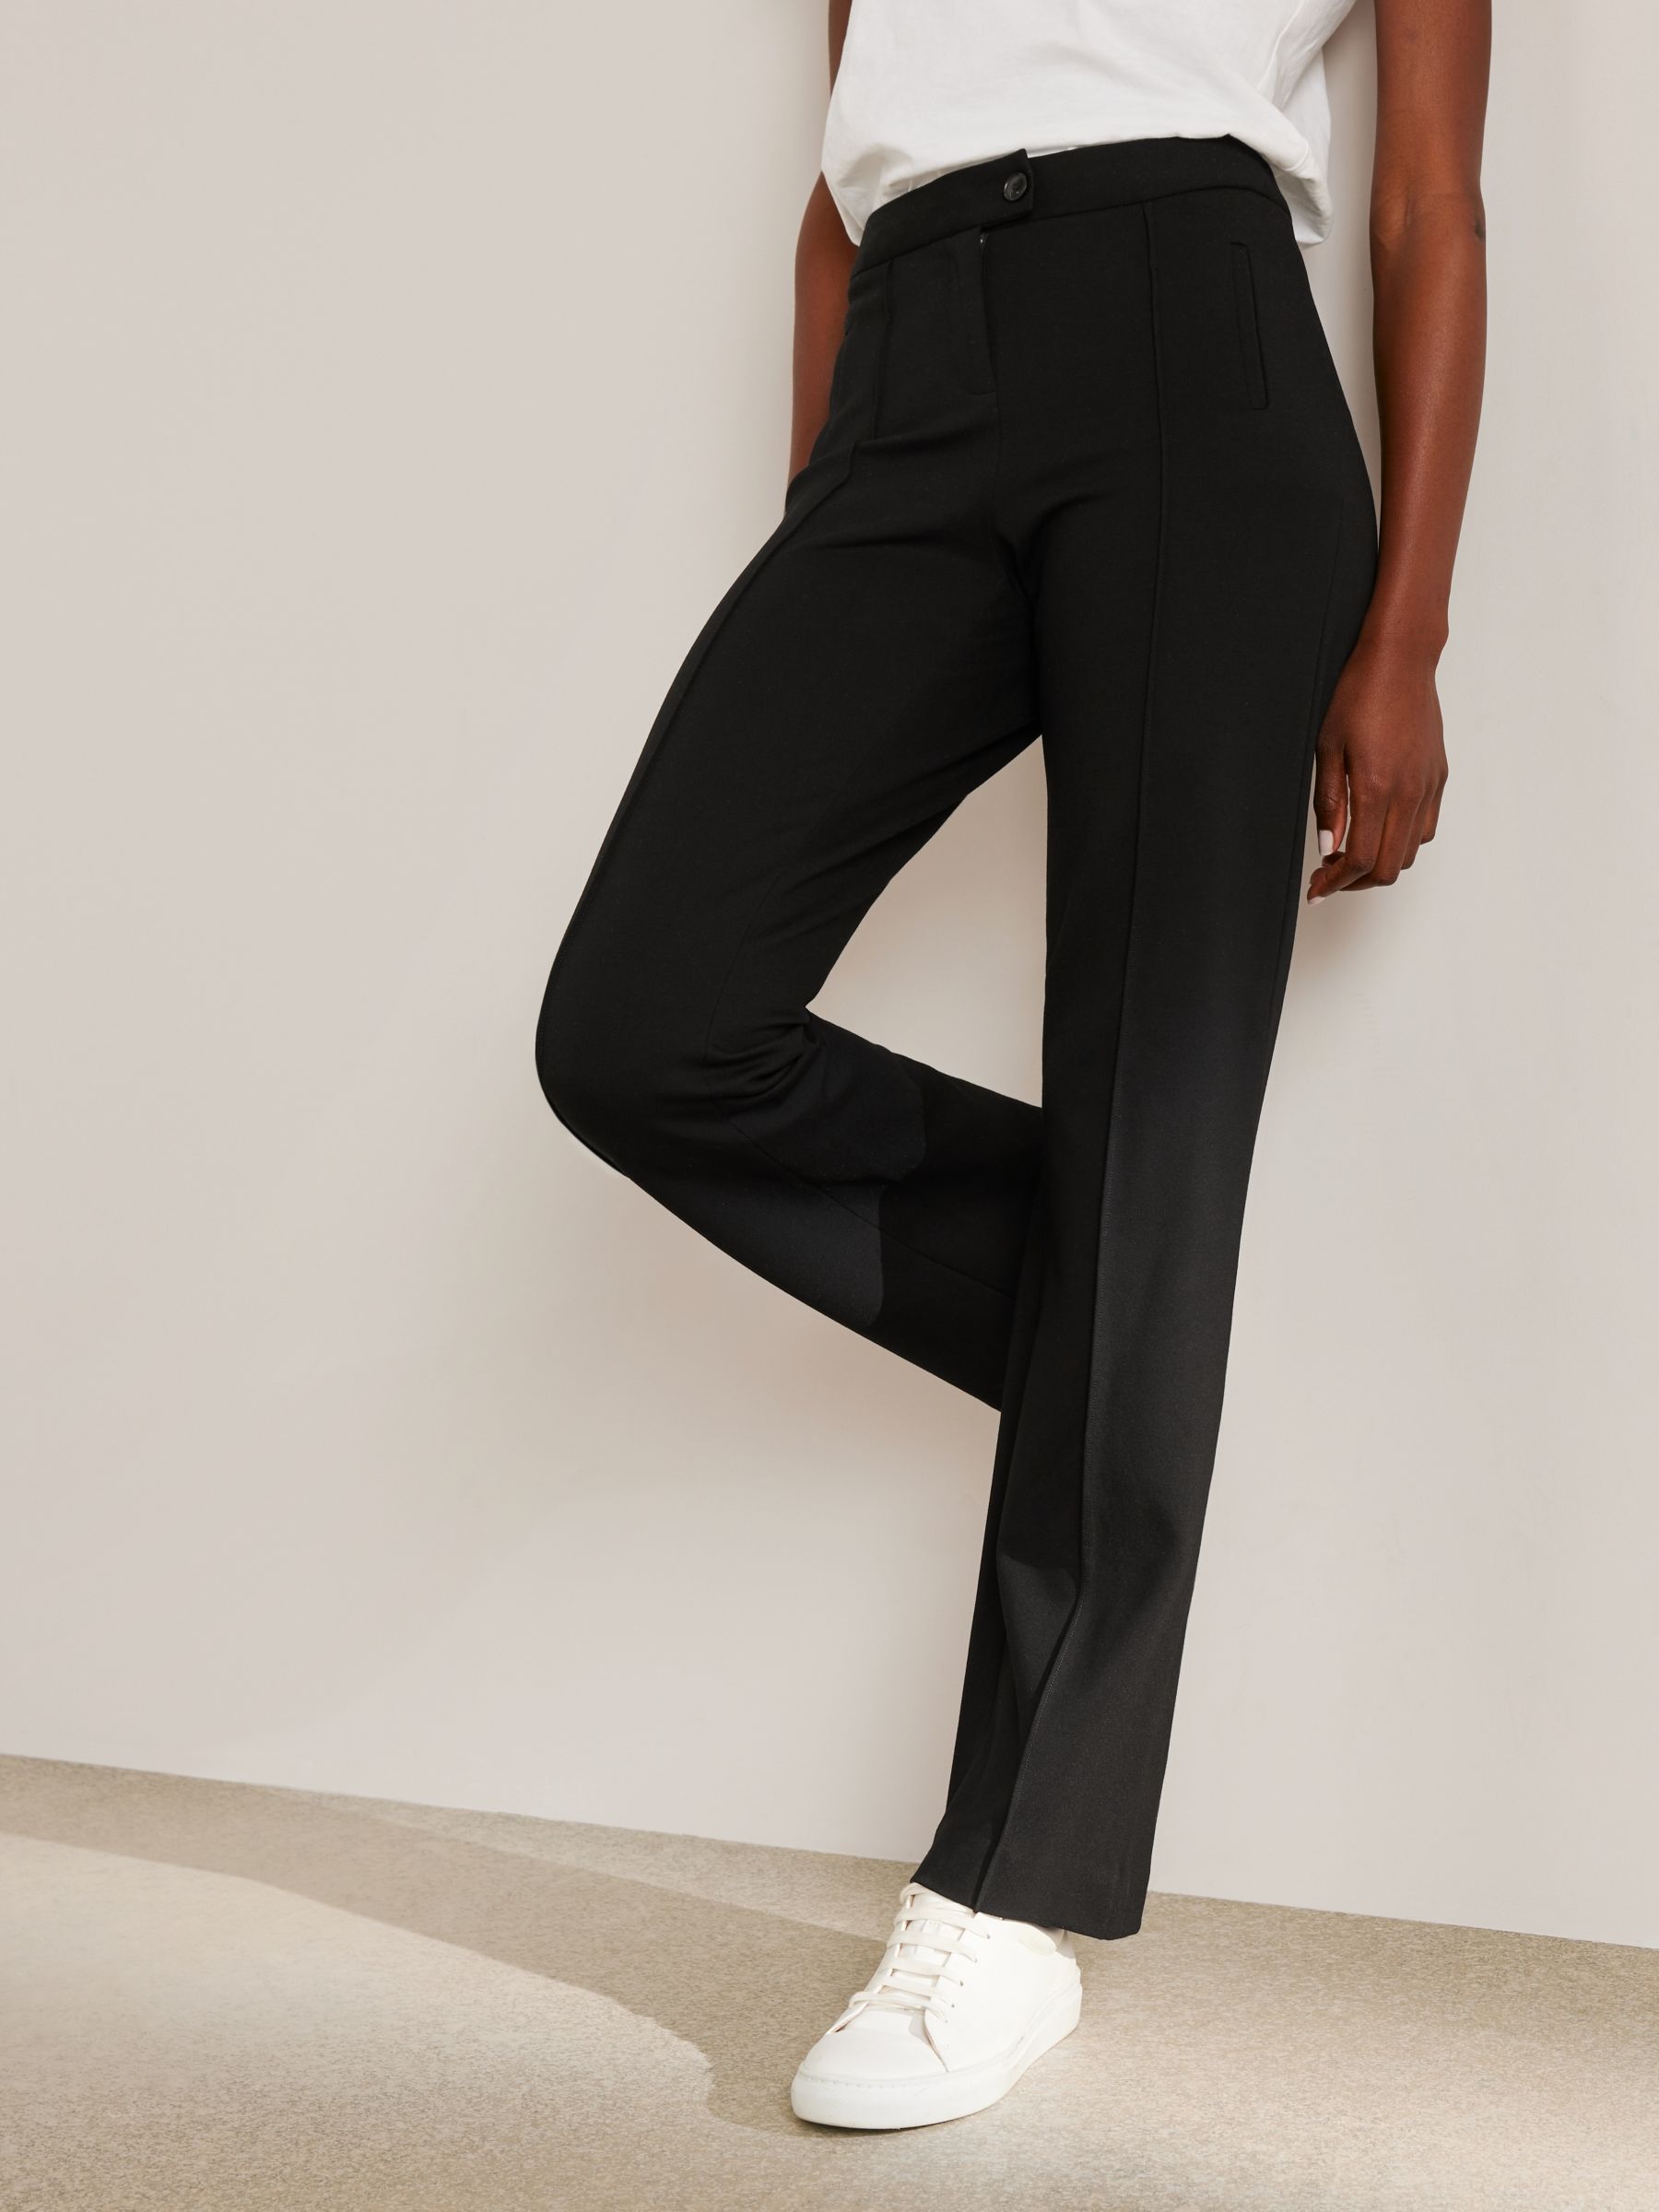 womens ponte trousers Hot Sale OFF68%